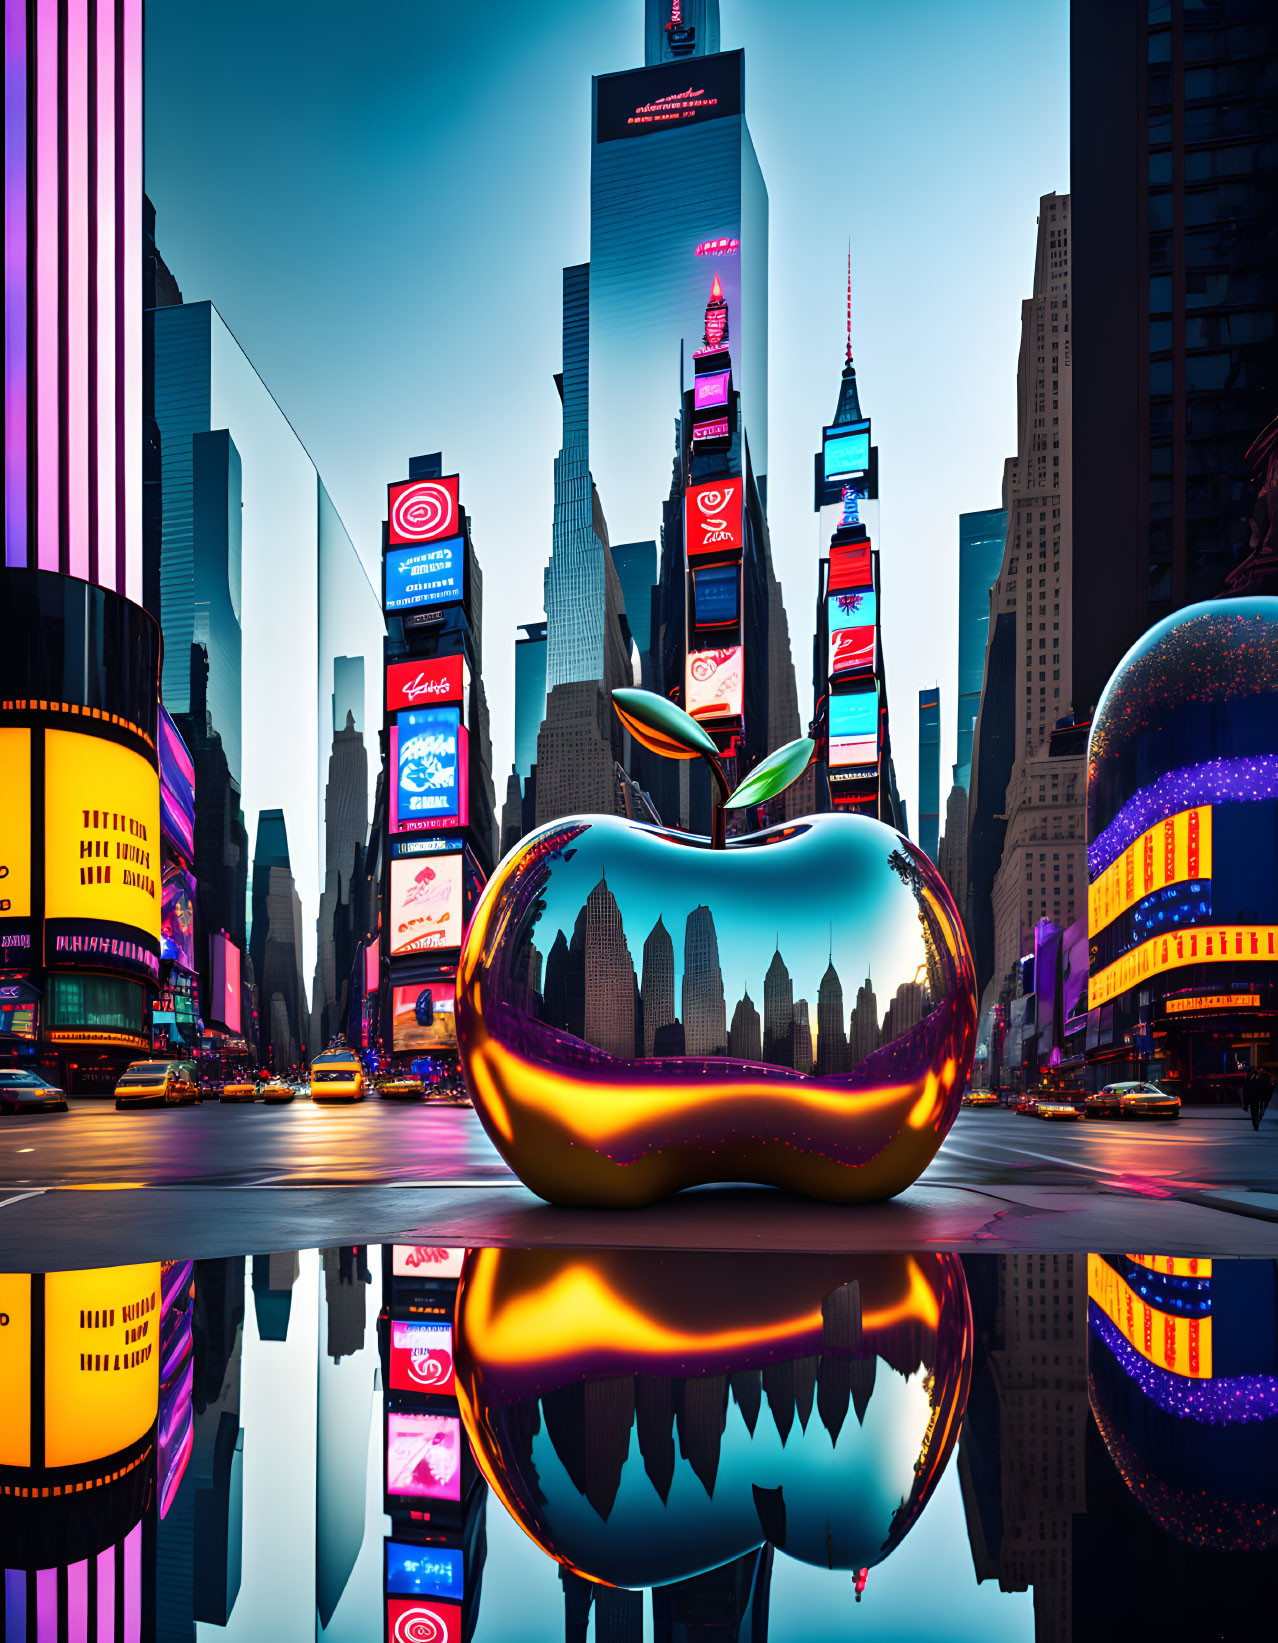 Colorful Cityscape Featuring Giant Reflective Apple Sculpture